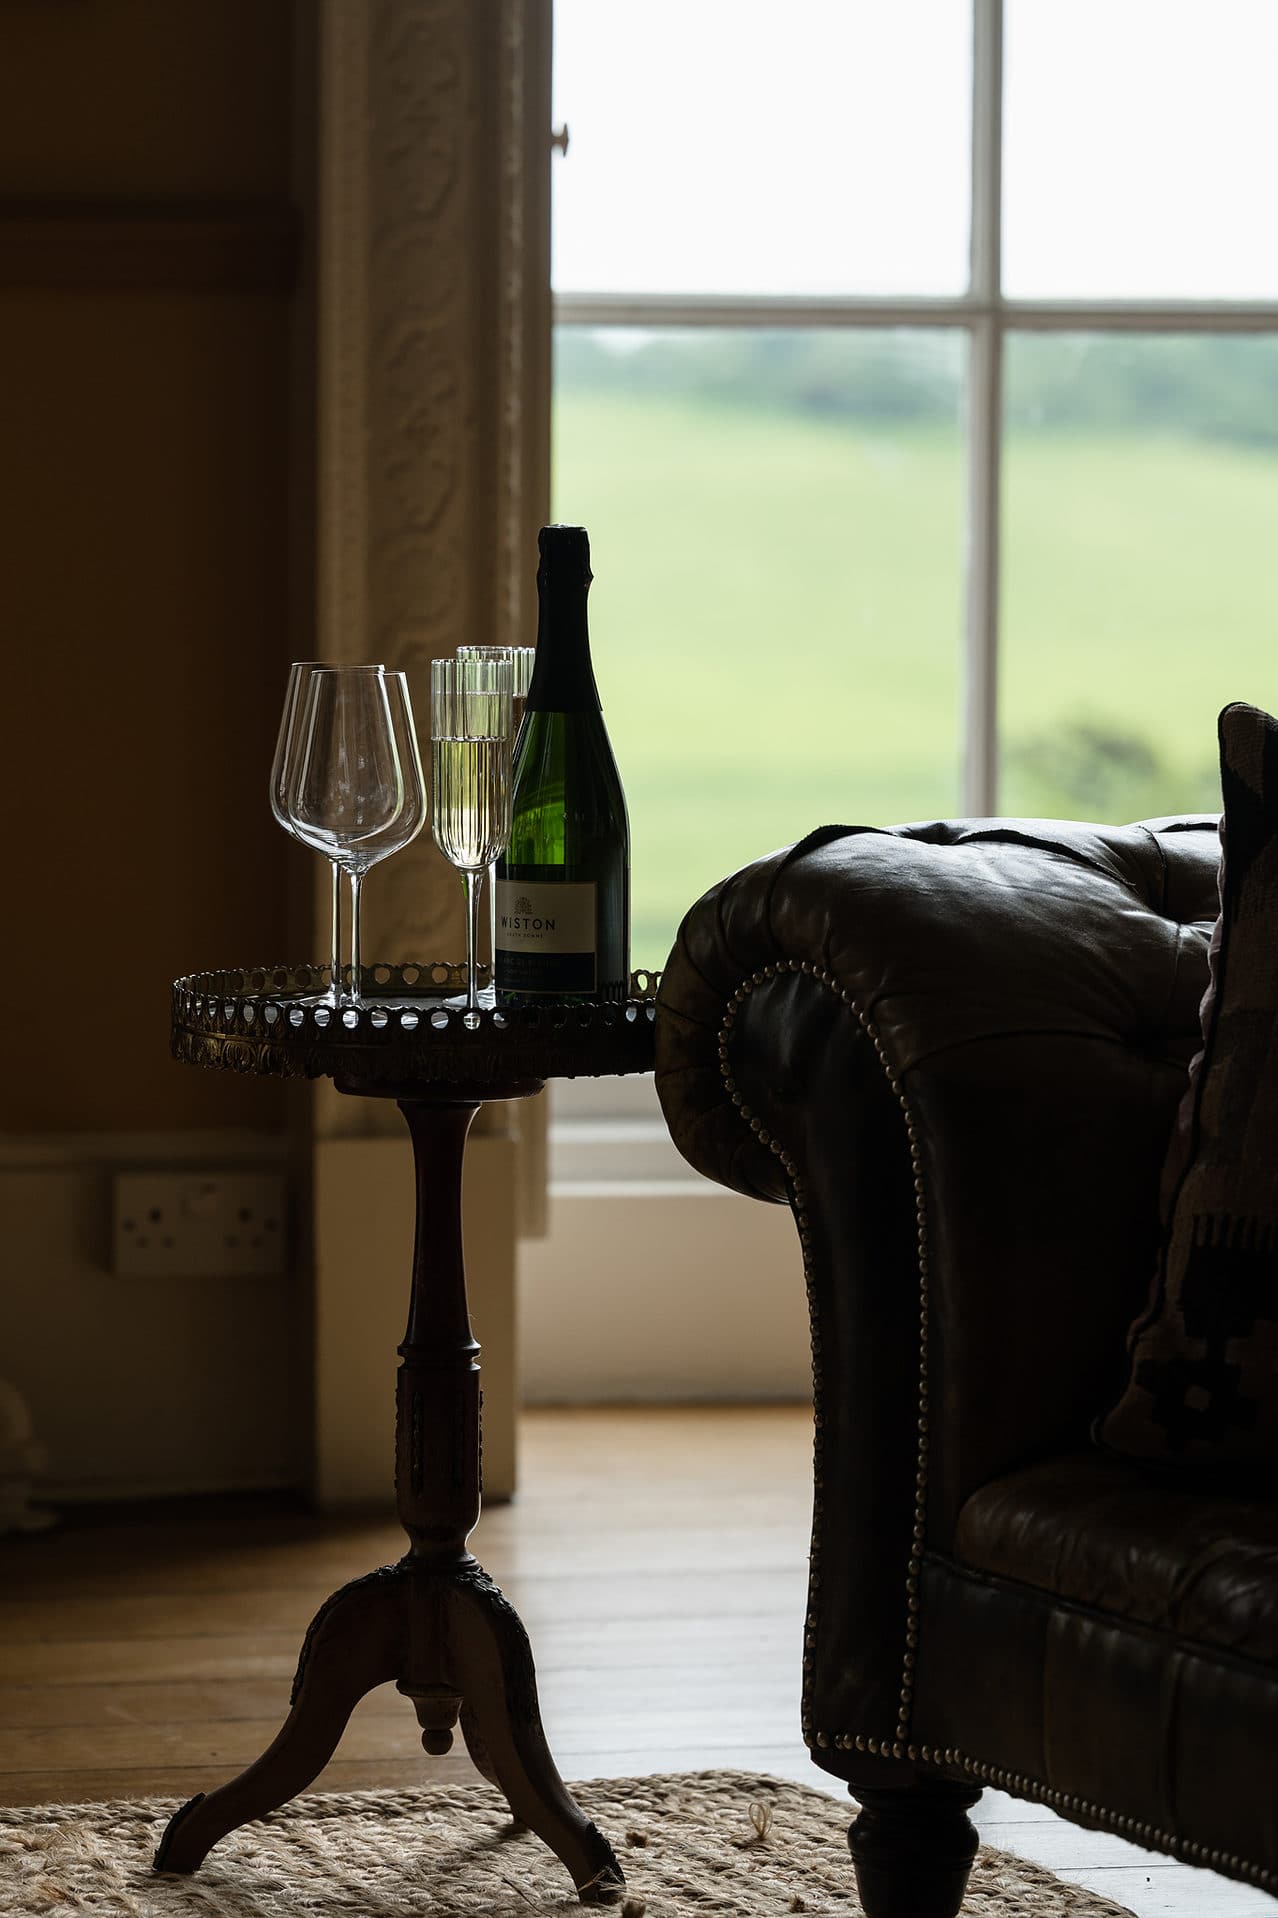 A bottle of wine and four glasses on an antique wine table next to the arm of a leather chesterfield sofa